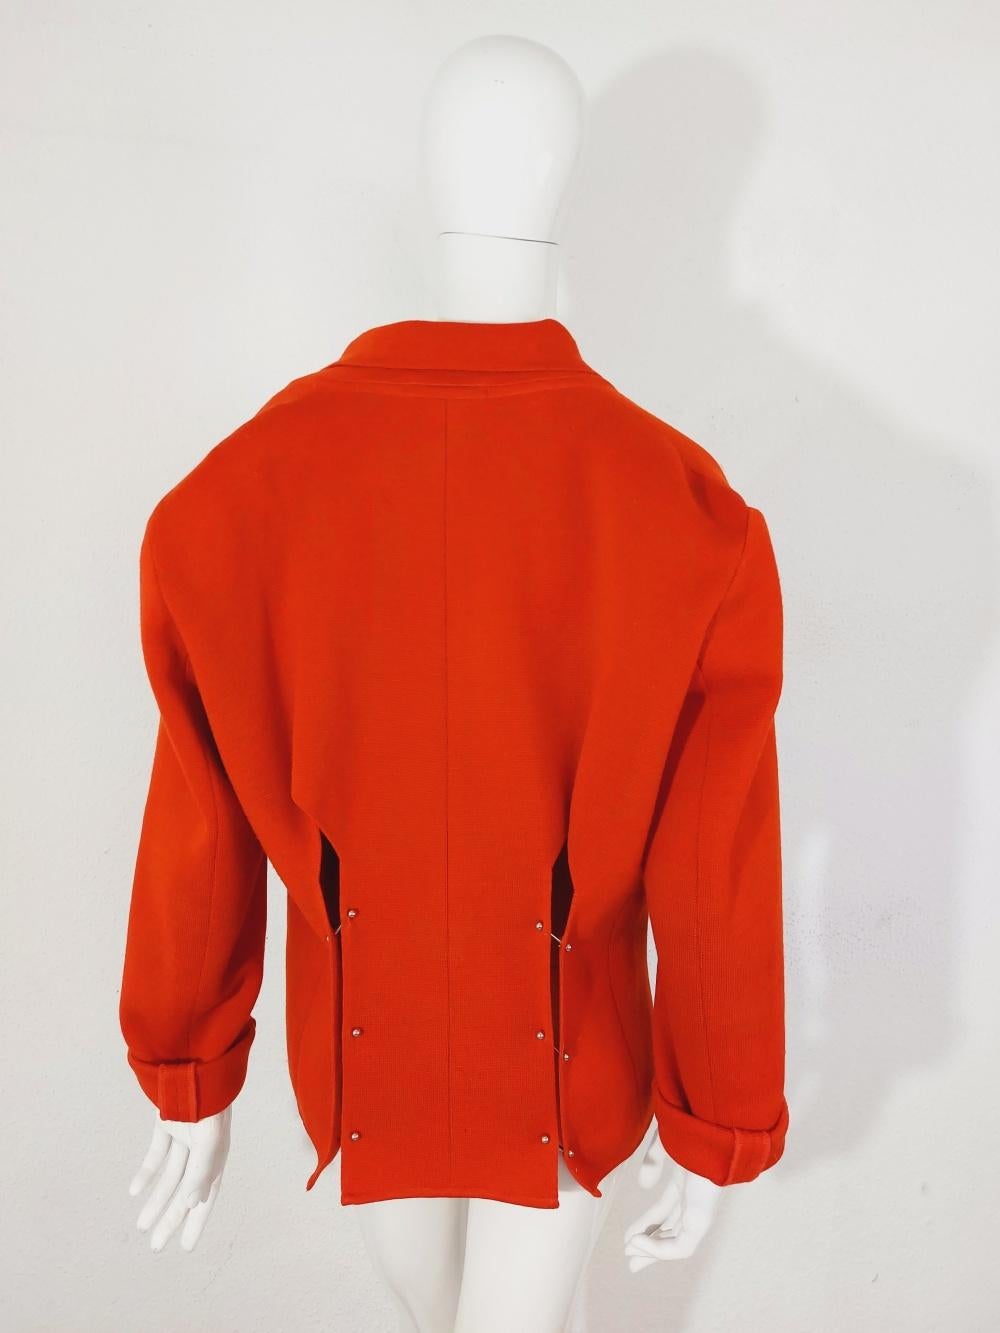 
Issey Miyake Pleats Please Red Piercing Rock Punk Japanese Steampunk Deconstructed Rivet Coat Jacket Blazer

Piercing vintage coat from Issey Miyake! 
Very good vinage condition, except some pin holes on the back part of the collar, almost